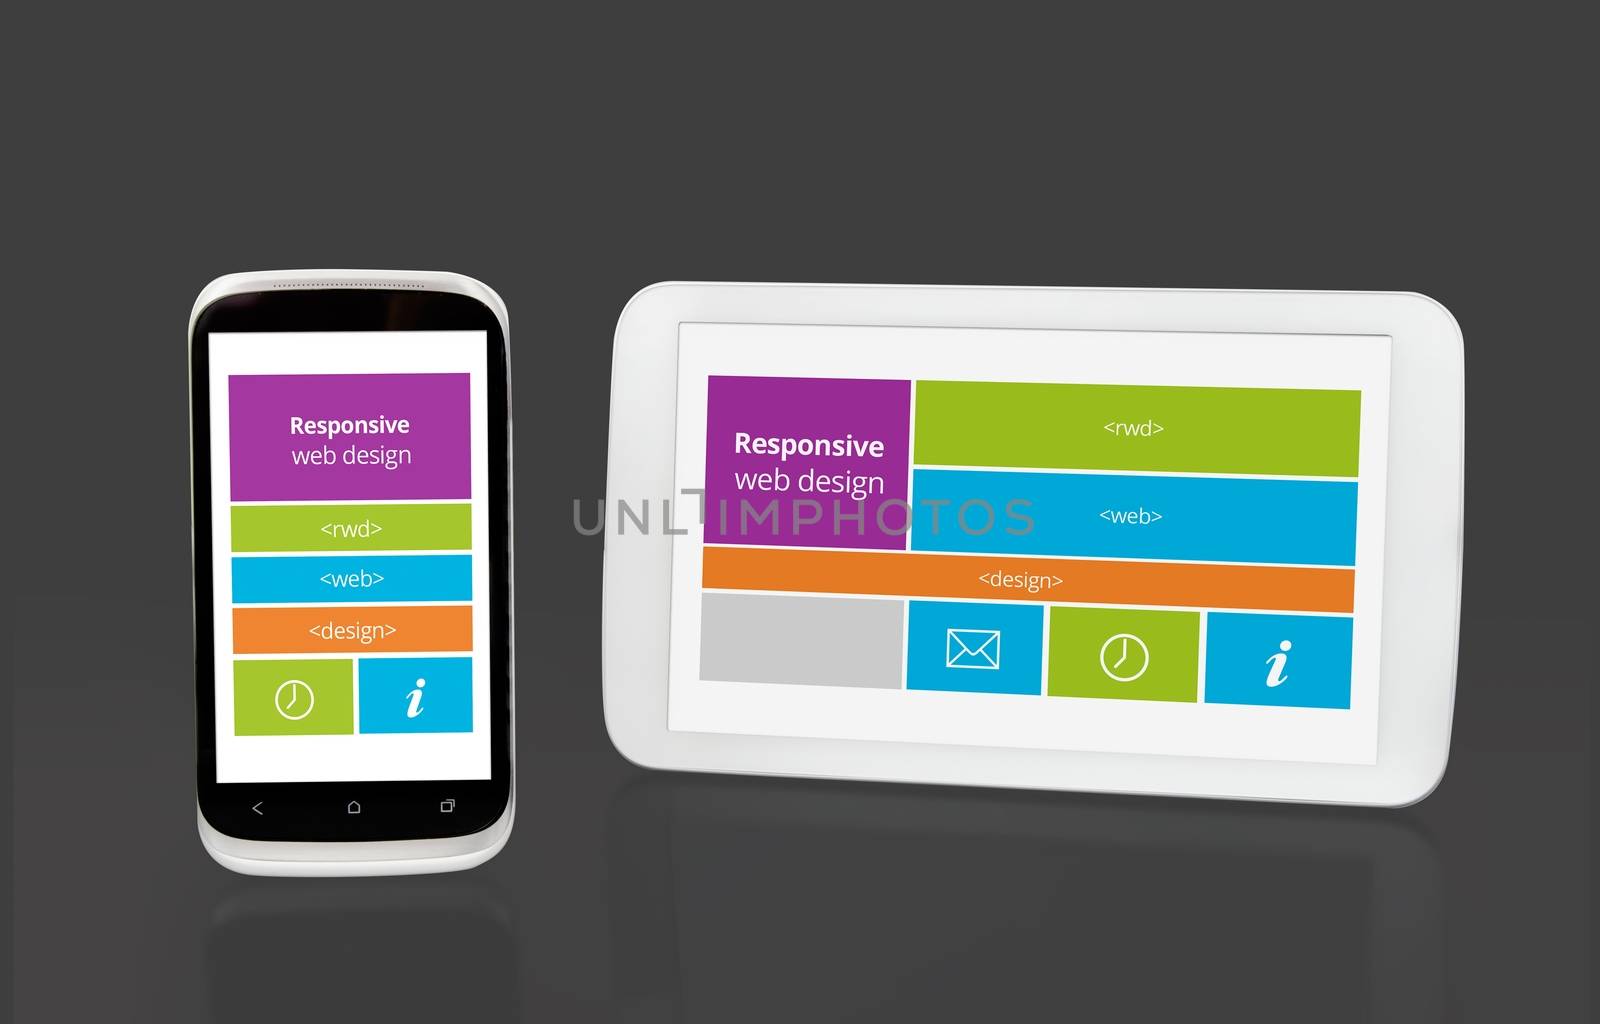 Responsive web design on mobile tablet and smart phone devices